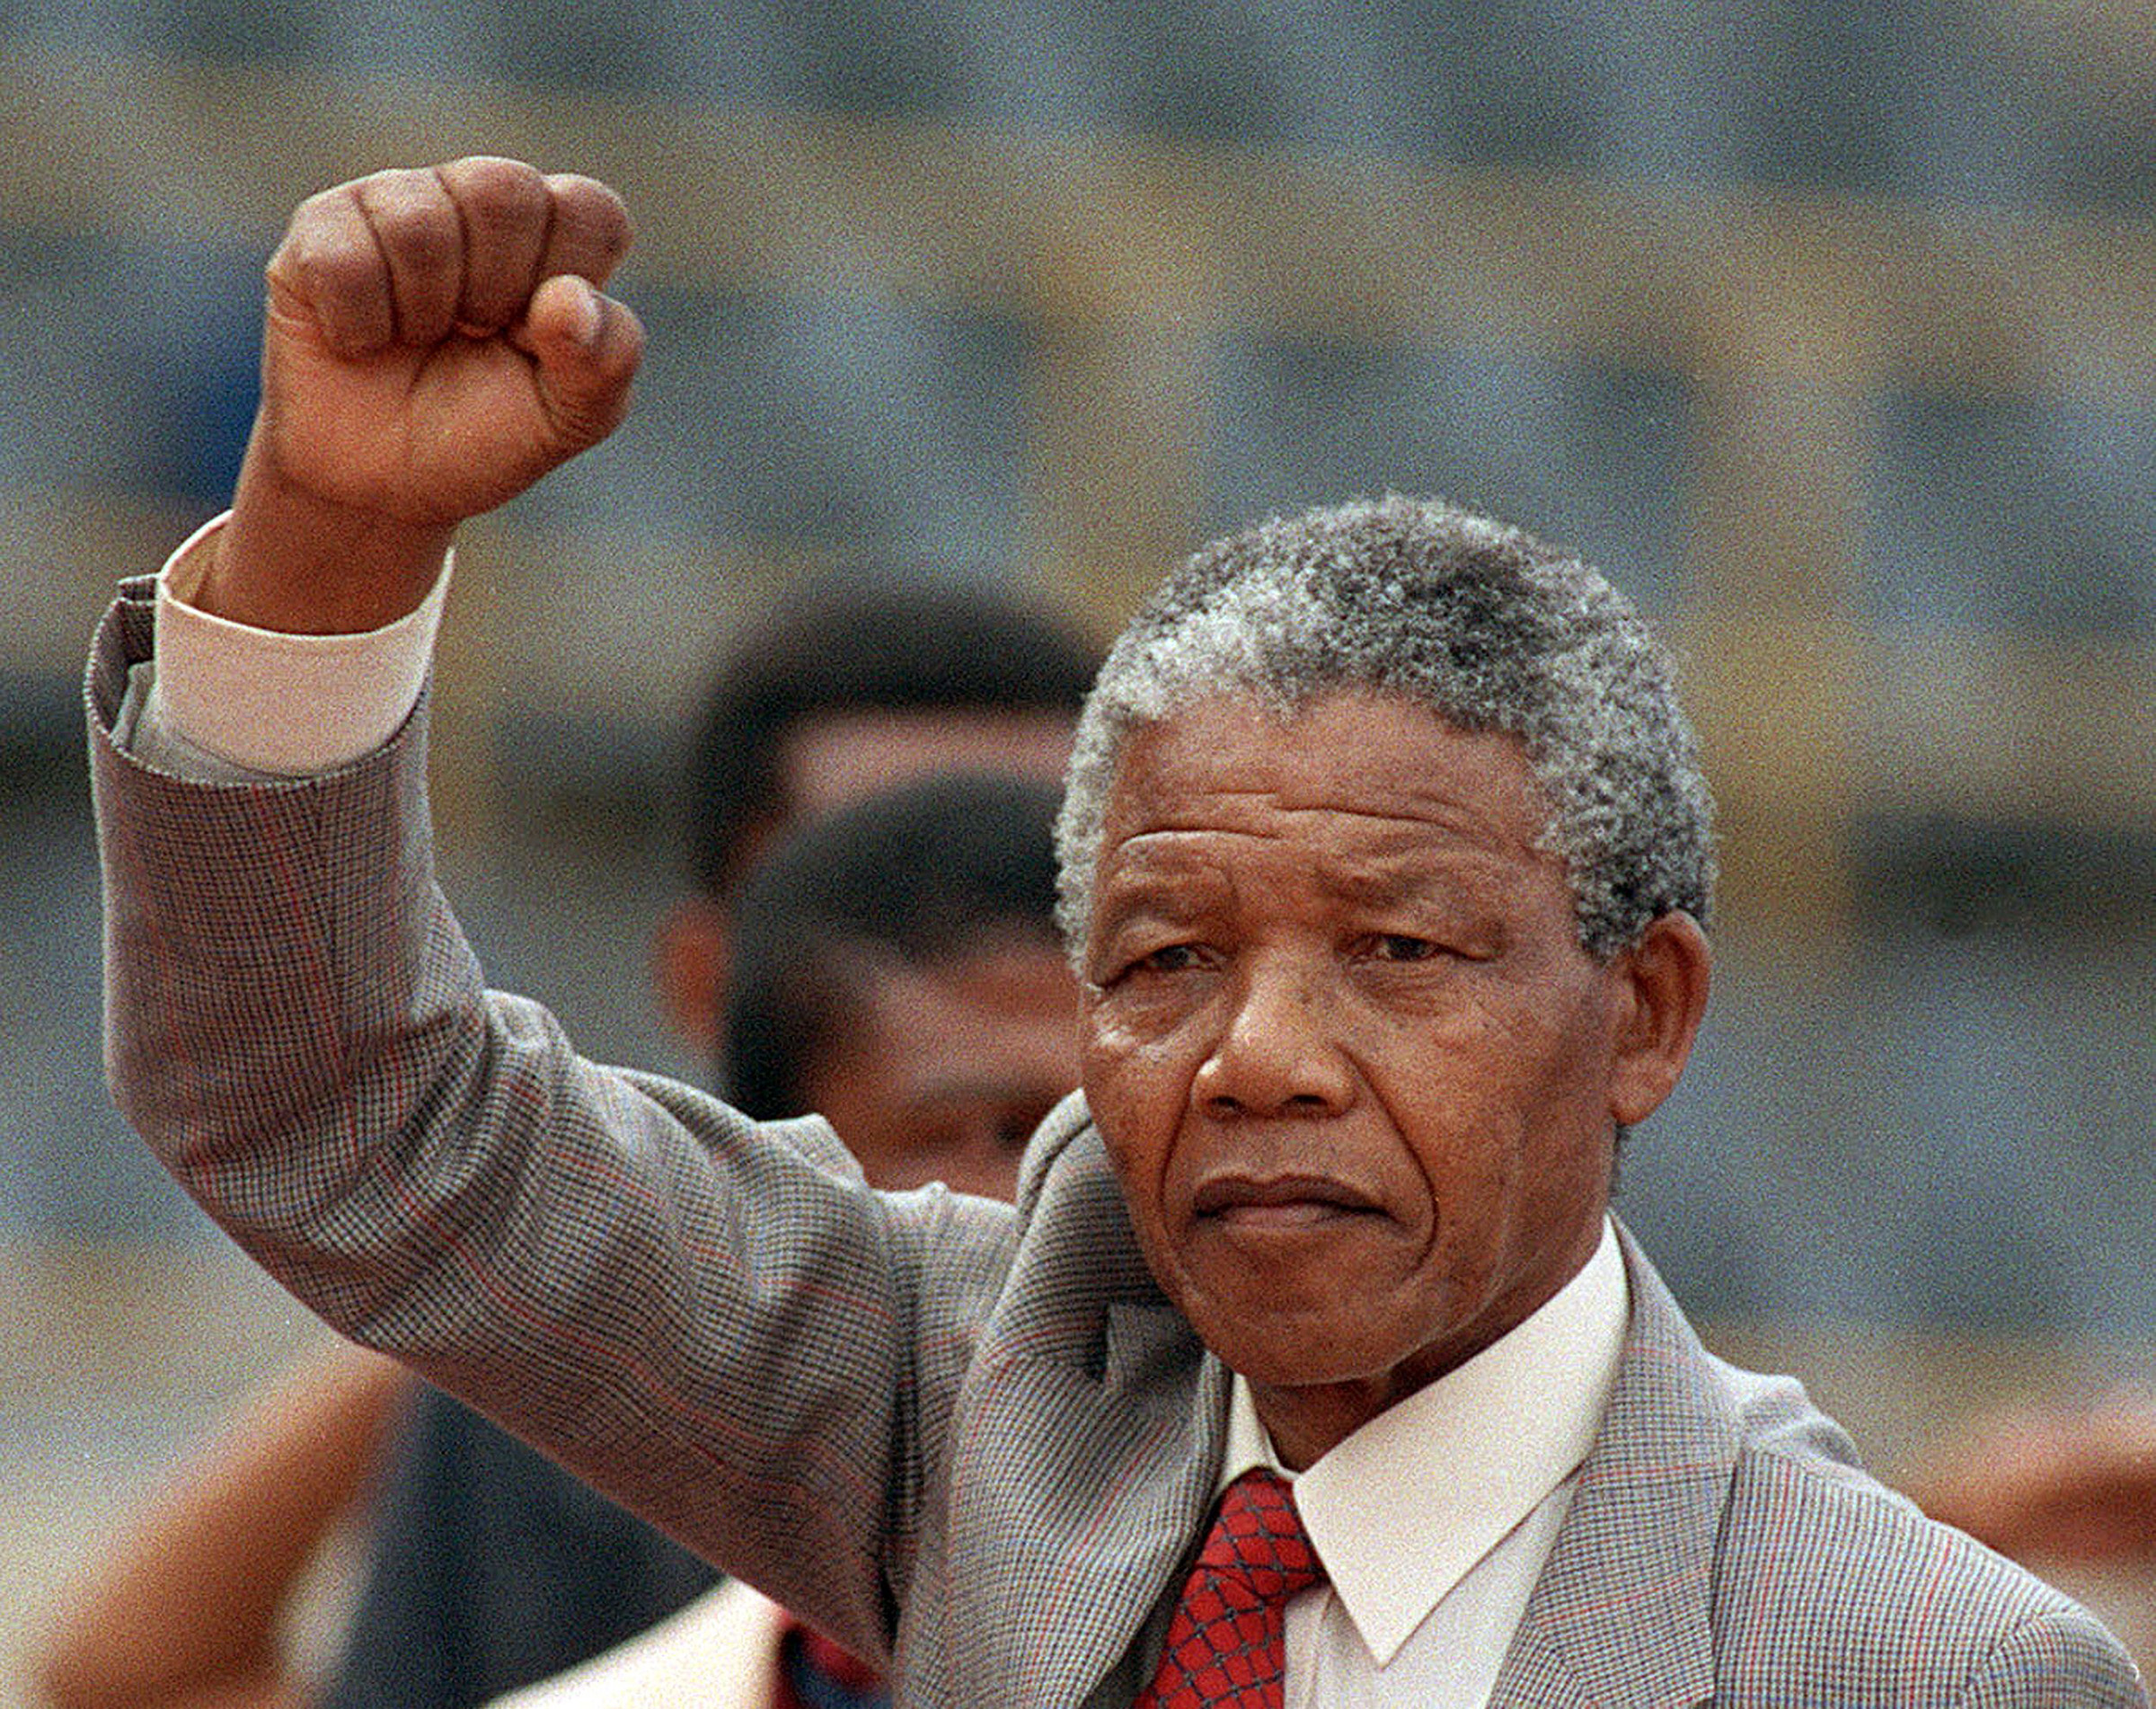 Nelson Mandela Complete History And Biography [facts]